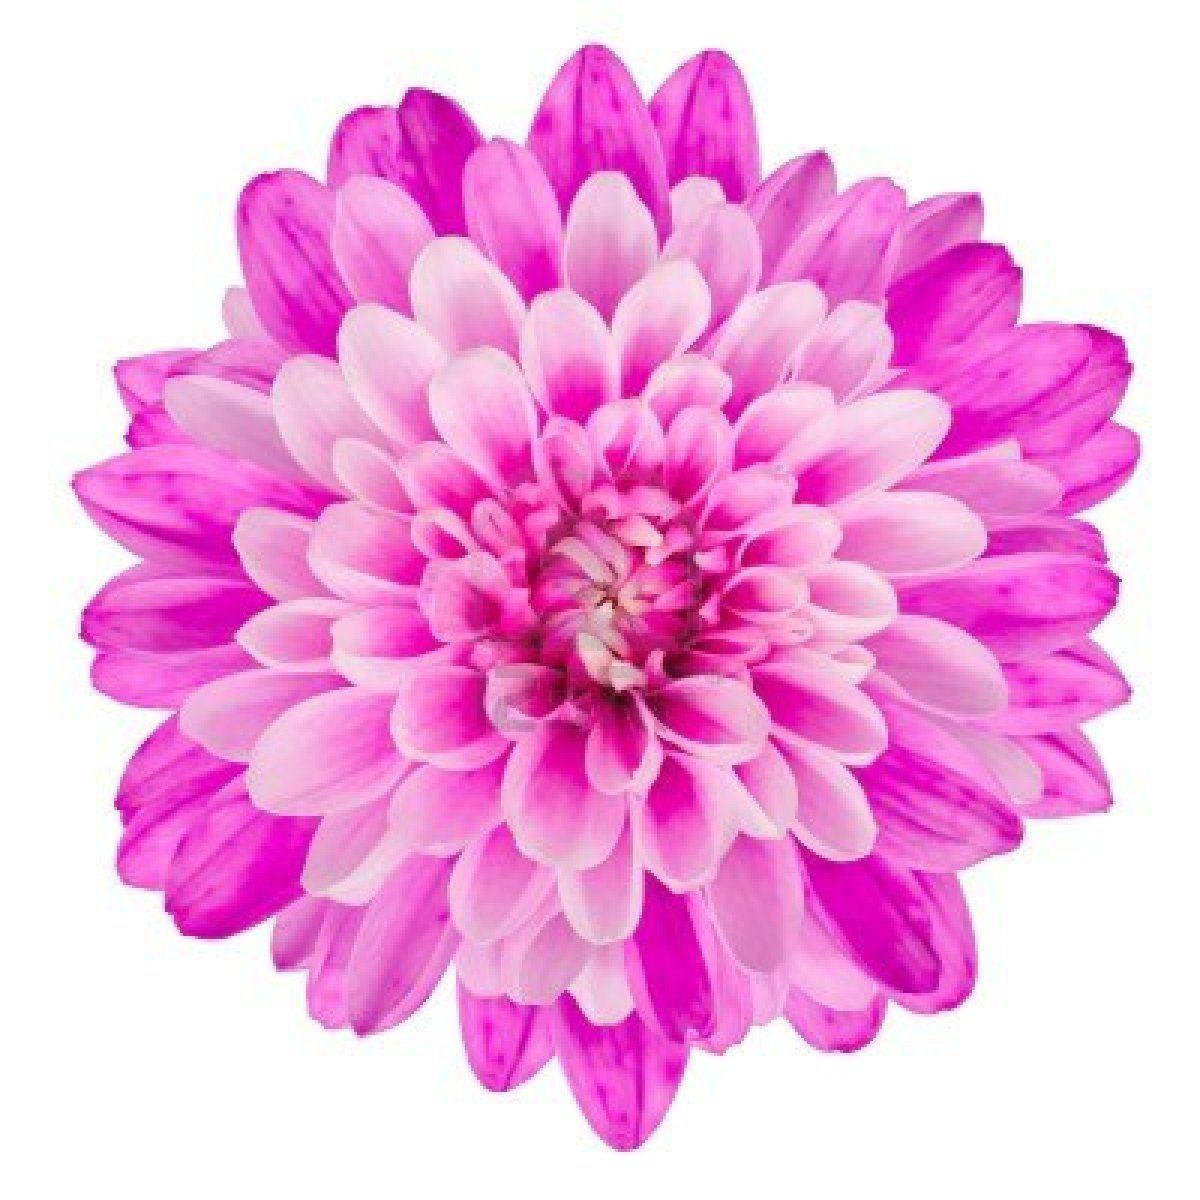 10 Flower Images with White Background | Top Collection of different types of flowers in the